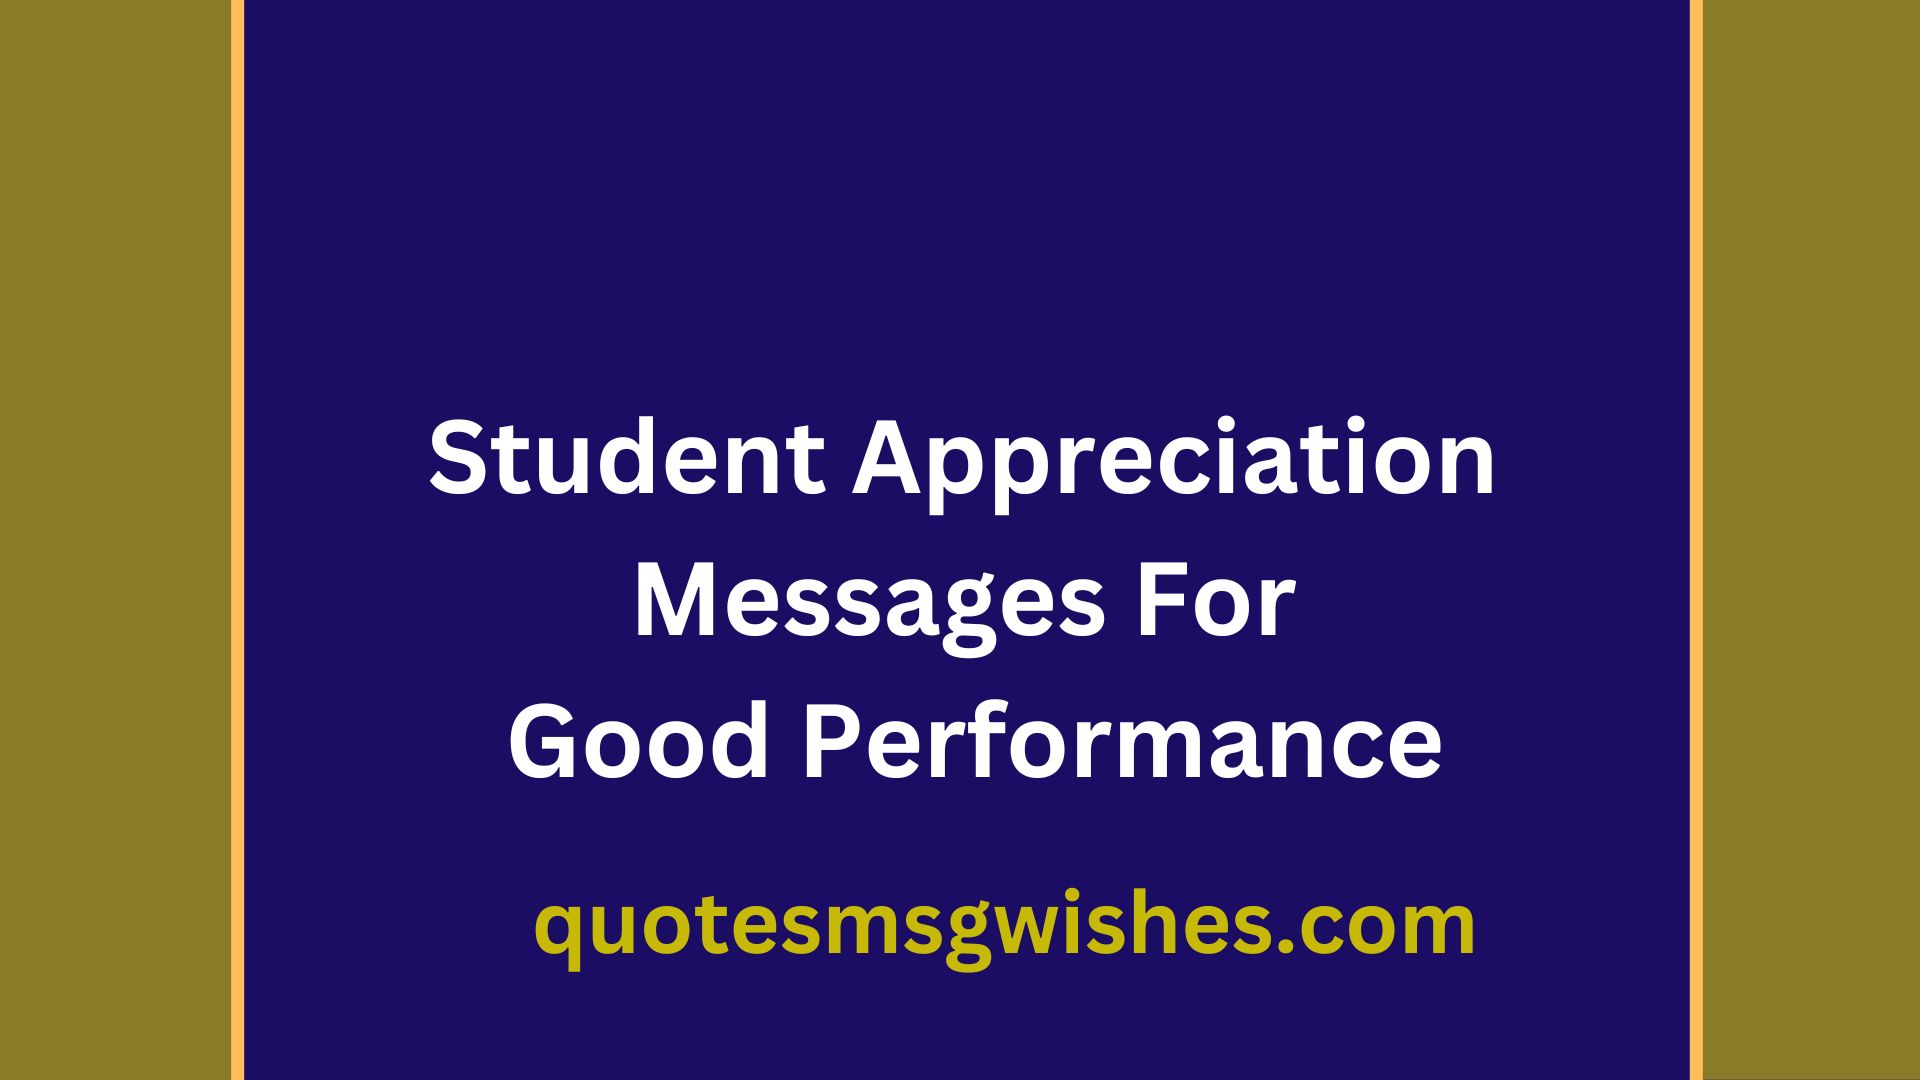 Student Appreciation Message For Good Performance